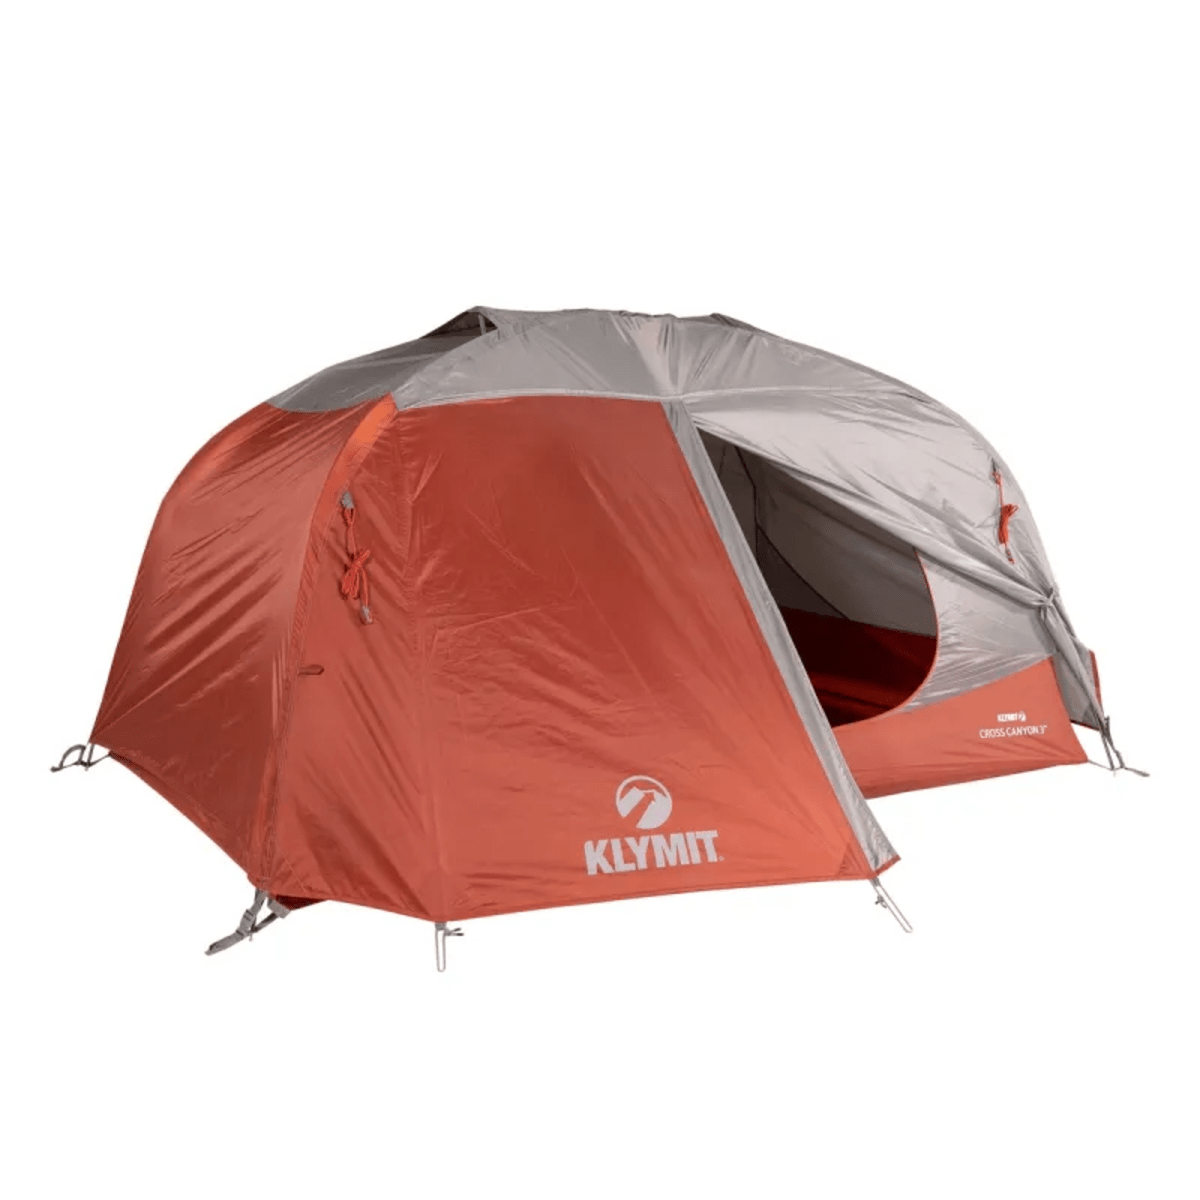 Cross Canyon Lightweight Tent for Backpacking